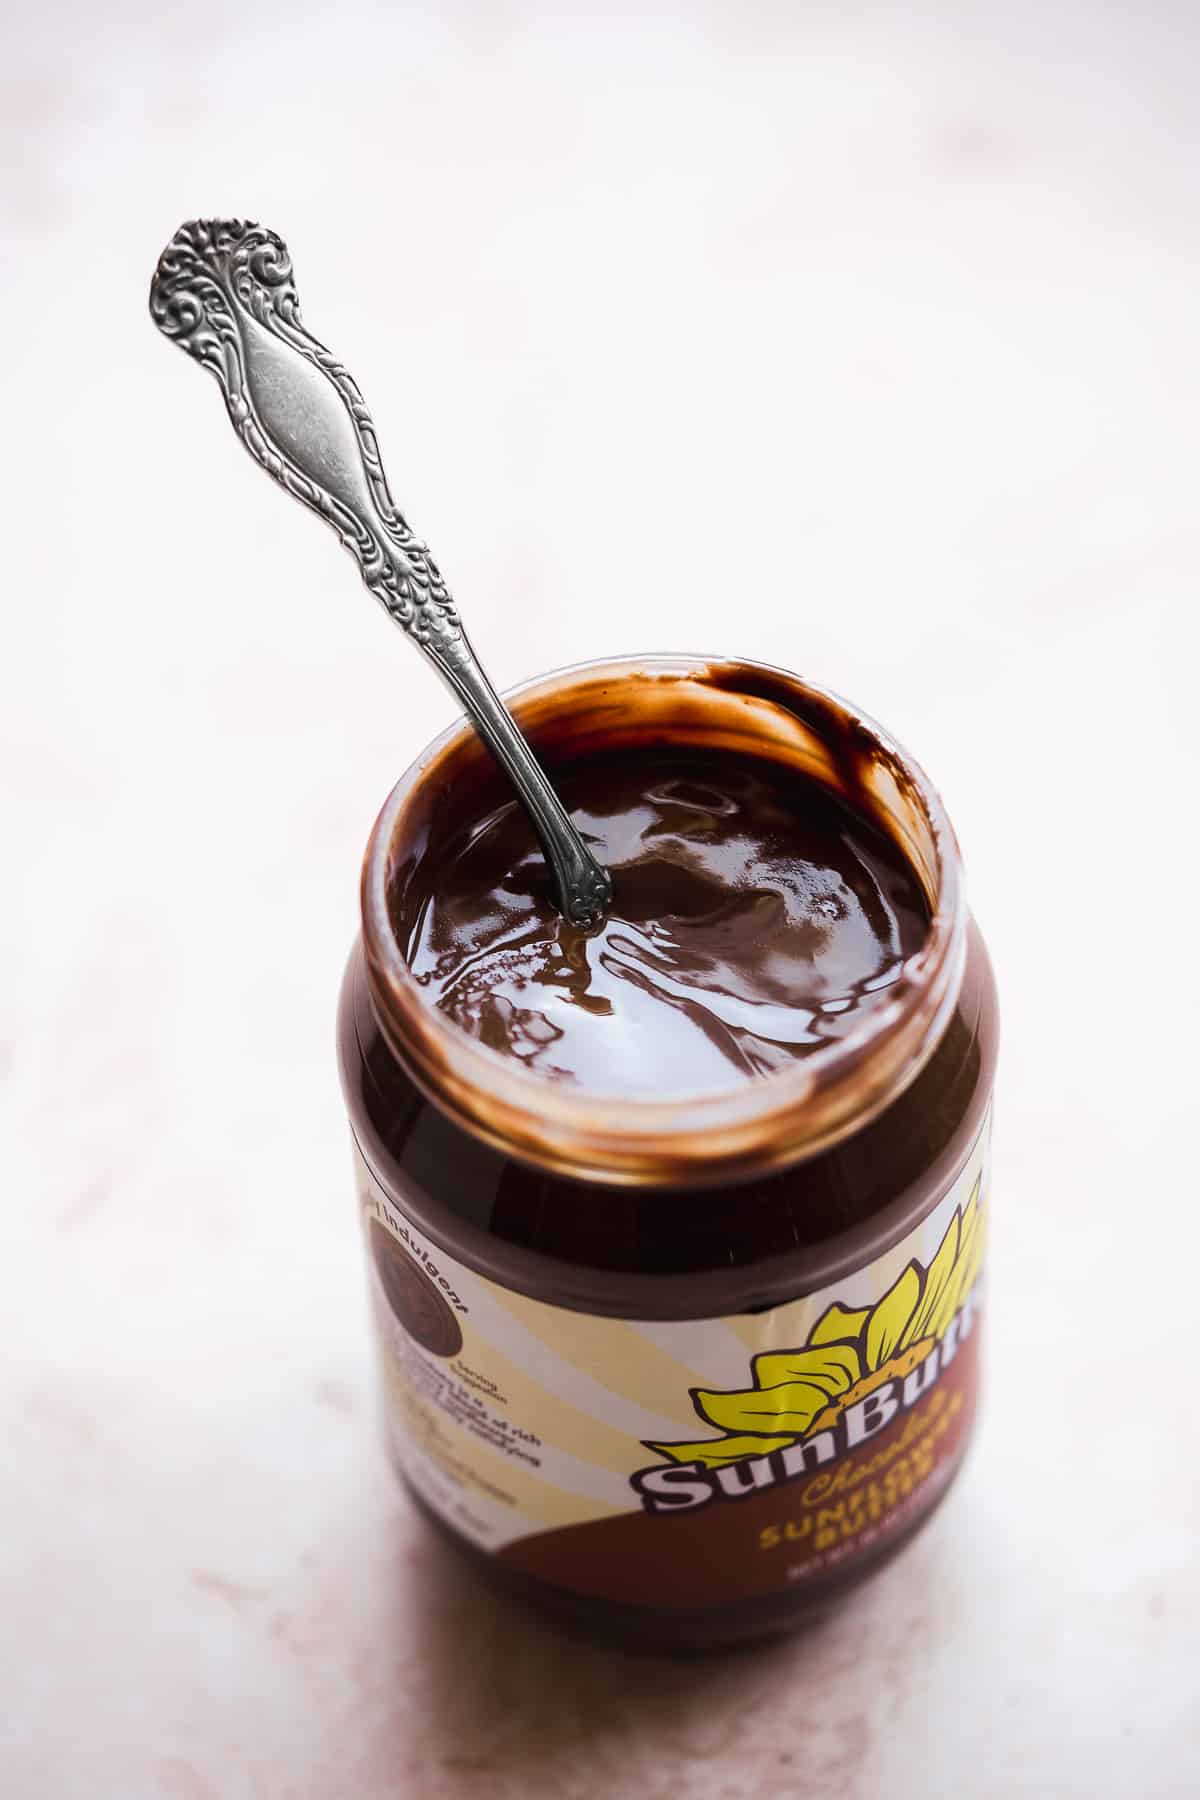 Jar of chocolate sunflower butter with a spoon resting in the jar.